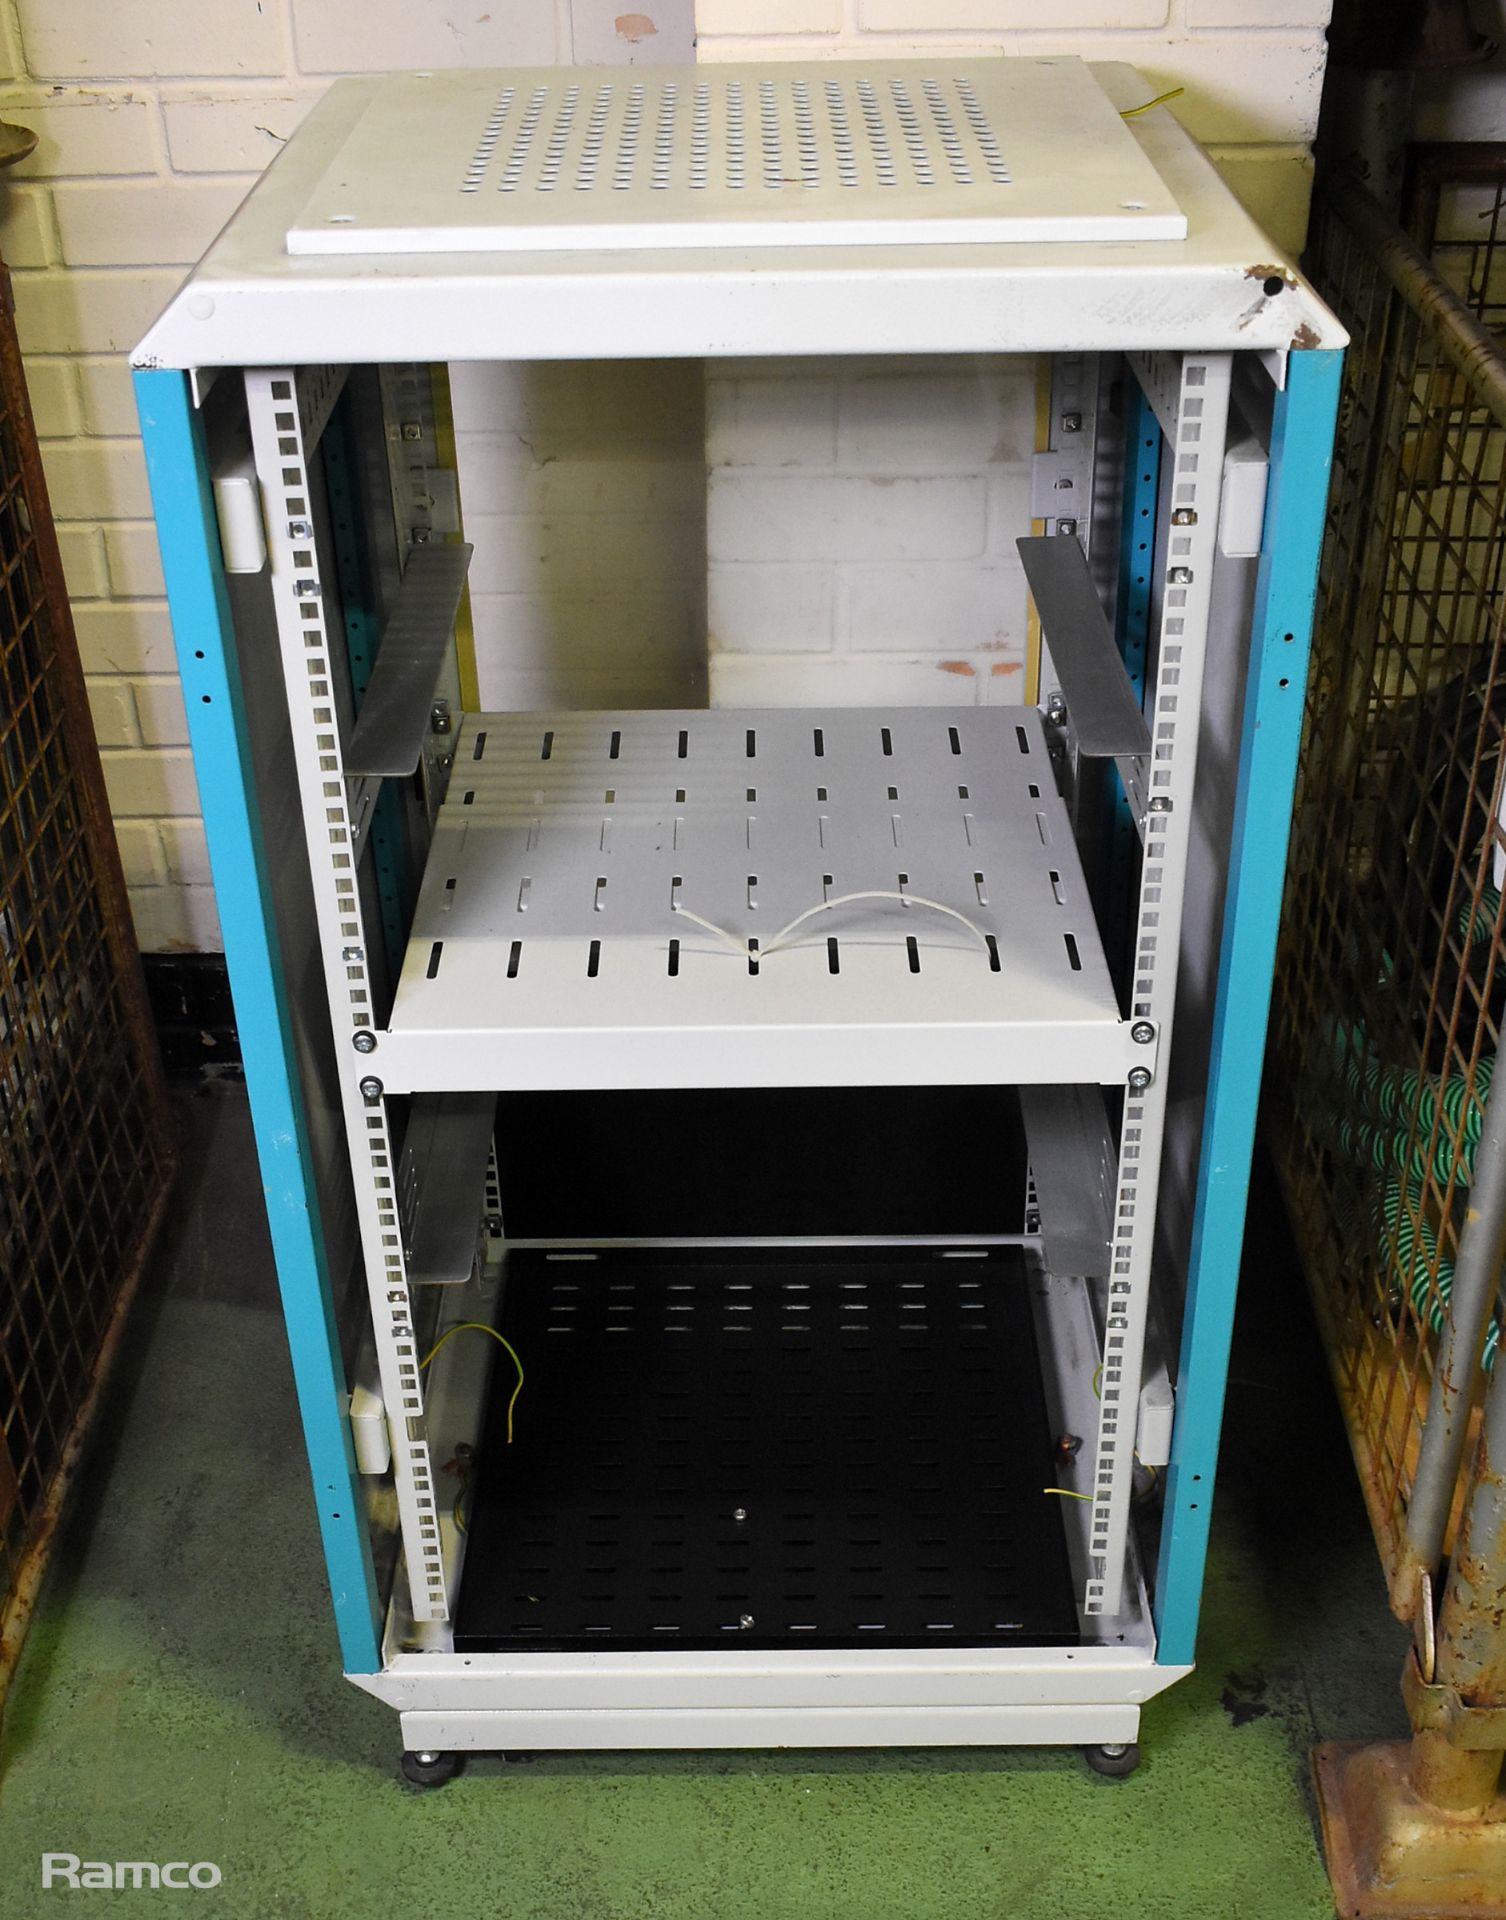 Rittal mobile server cabinet - W 600 x D 658 x H 1060mm - Image 5 of 6